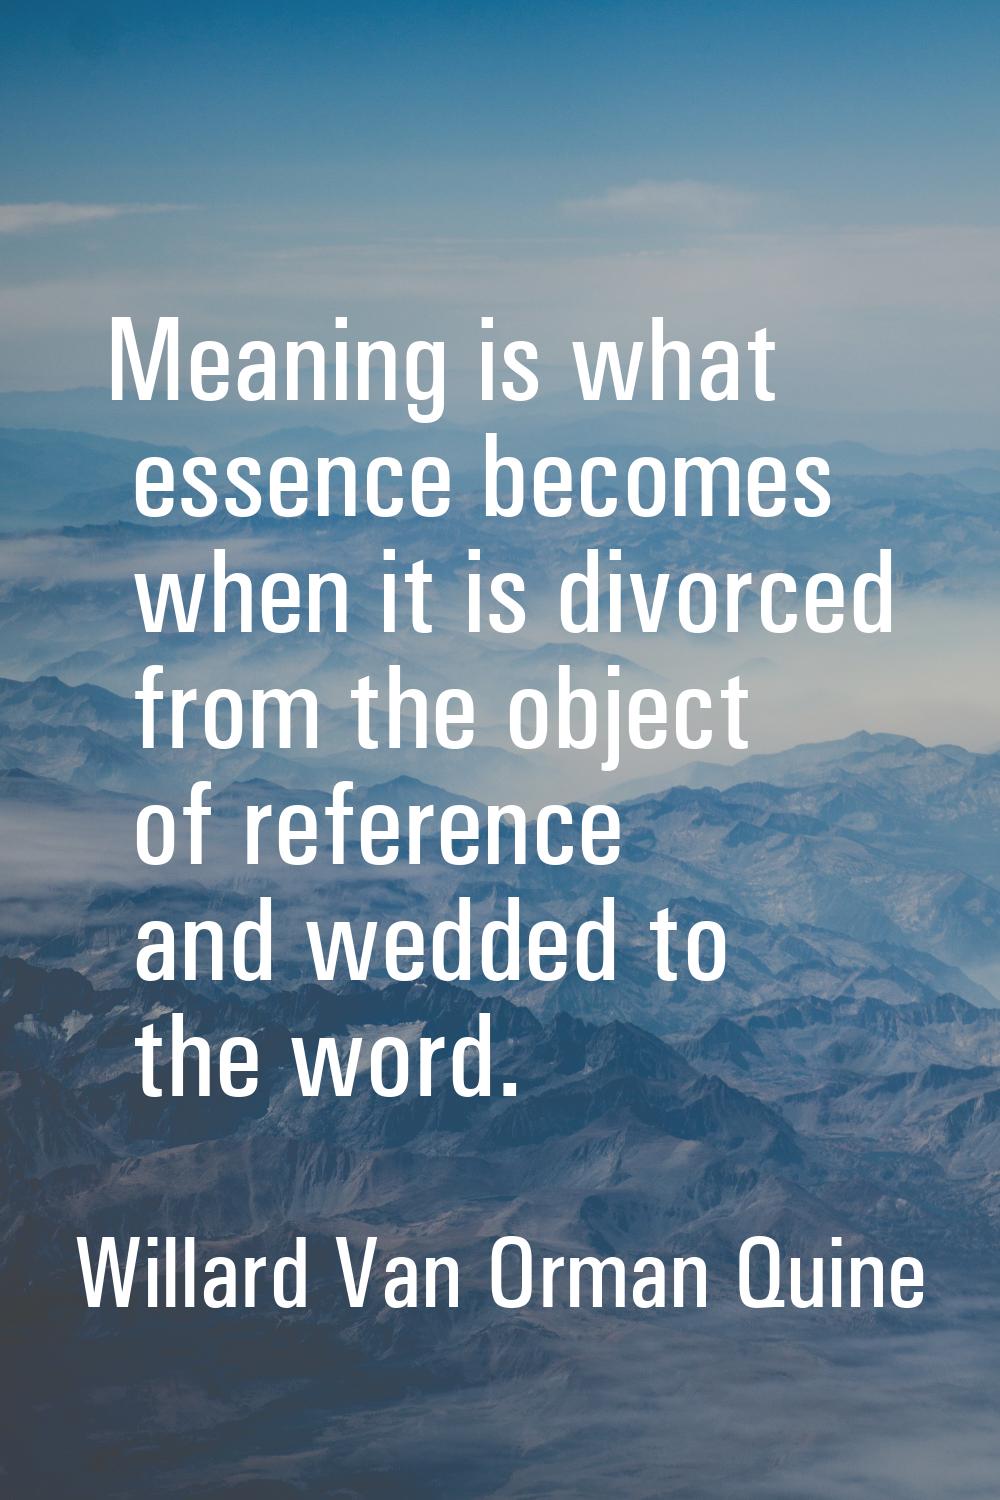 Meaning is what essence becomes when it is divorced from the object of reference and wedded to the 